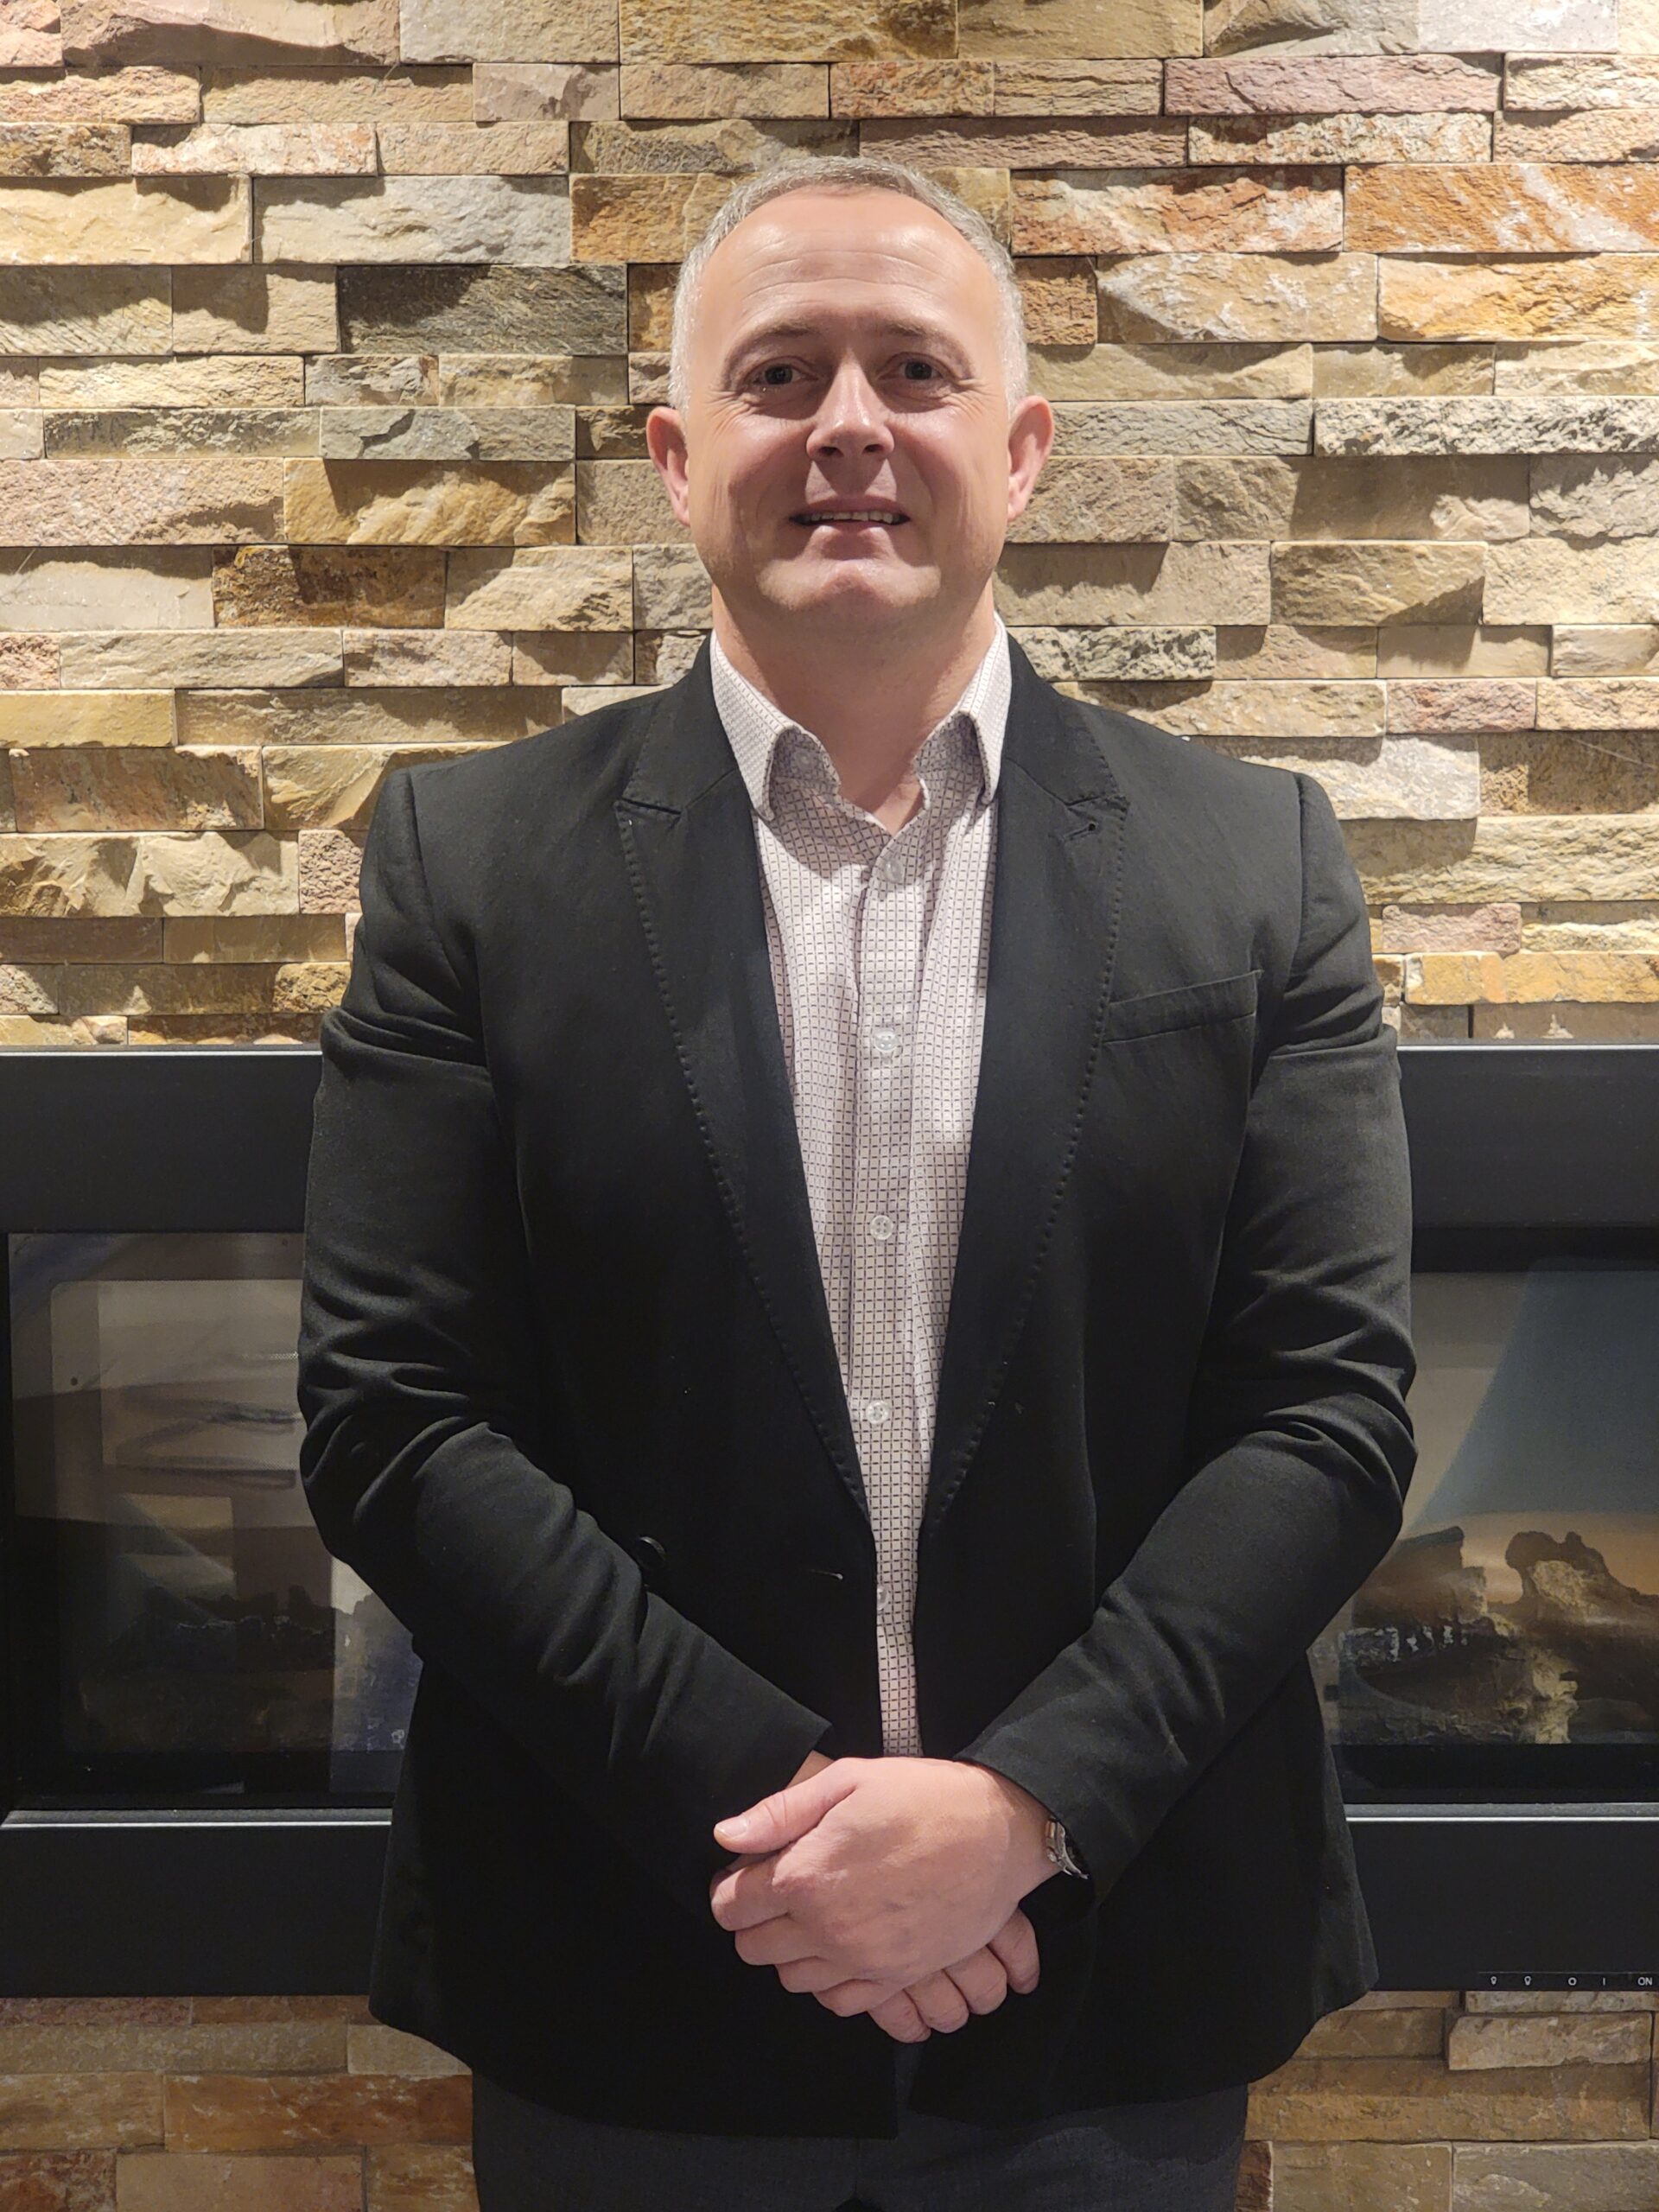 MEET ADAM DAVIE, GENERAL MANAGER AT THE NEWLY REFURBISHED DOUBLETREE BY HILTON OXFORD BELFRY